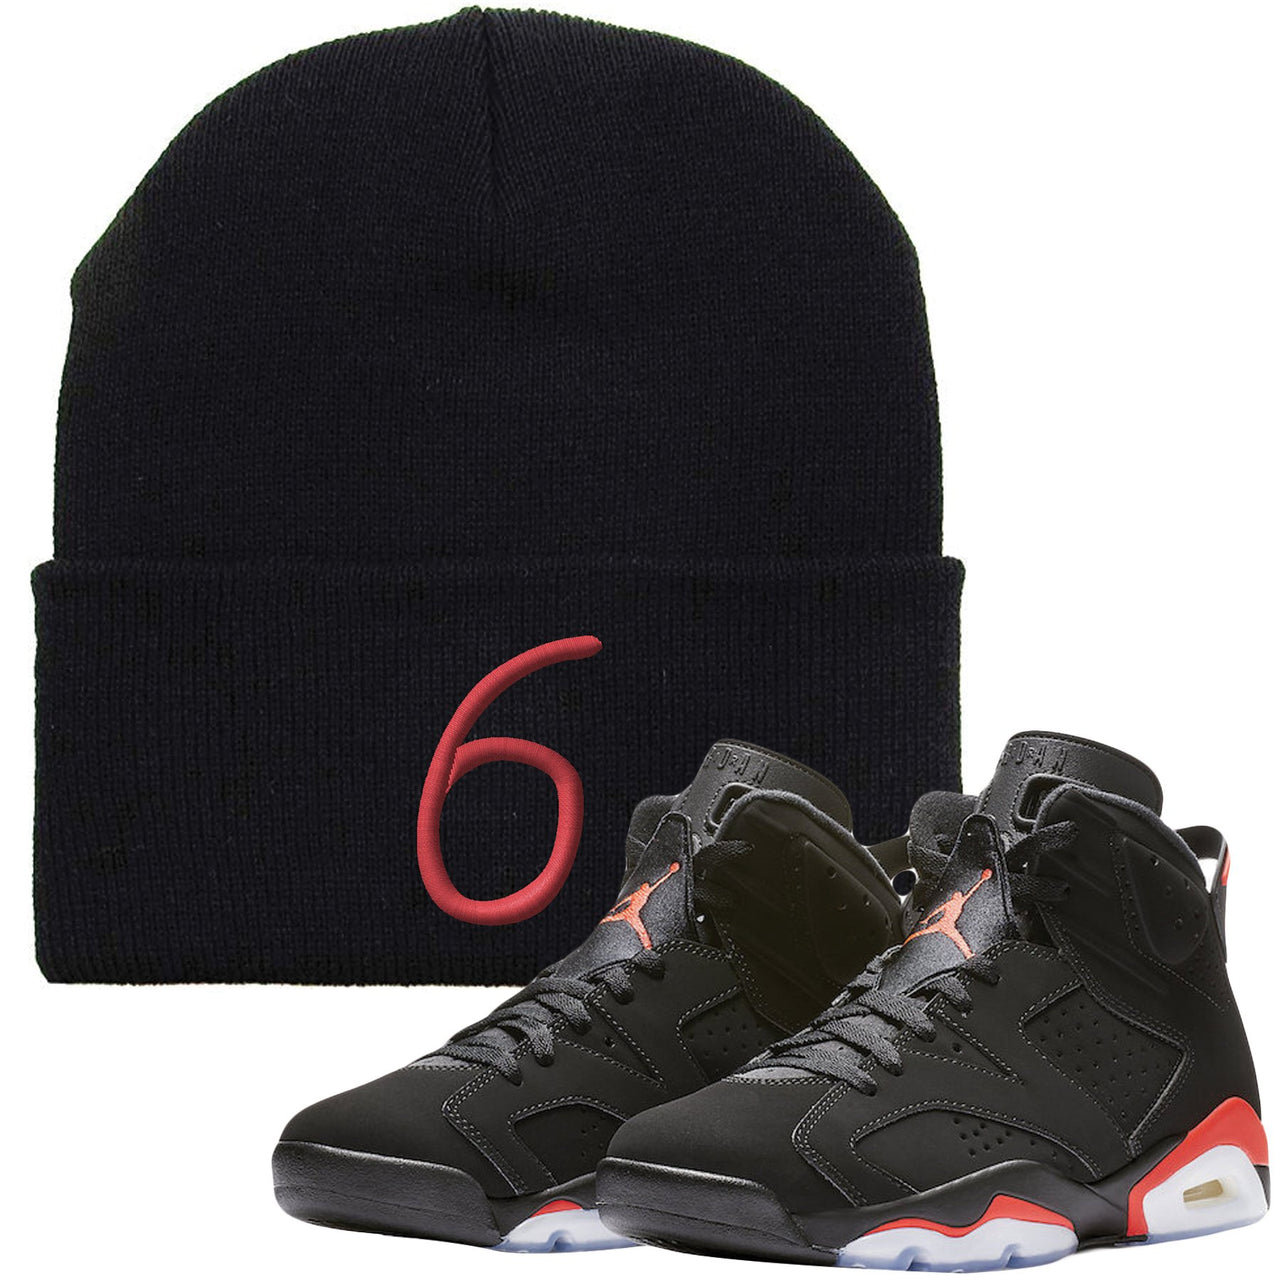 The Jordan 6 Infrared Beanie is custom designed to perfectly match the retro Jordan 6 Infrared sneakers from Nike.